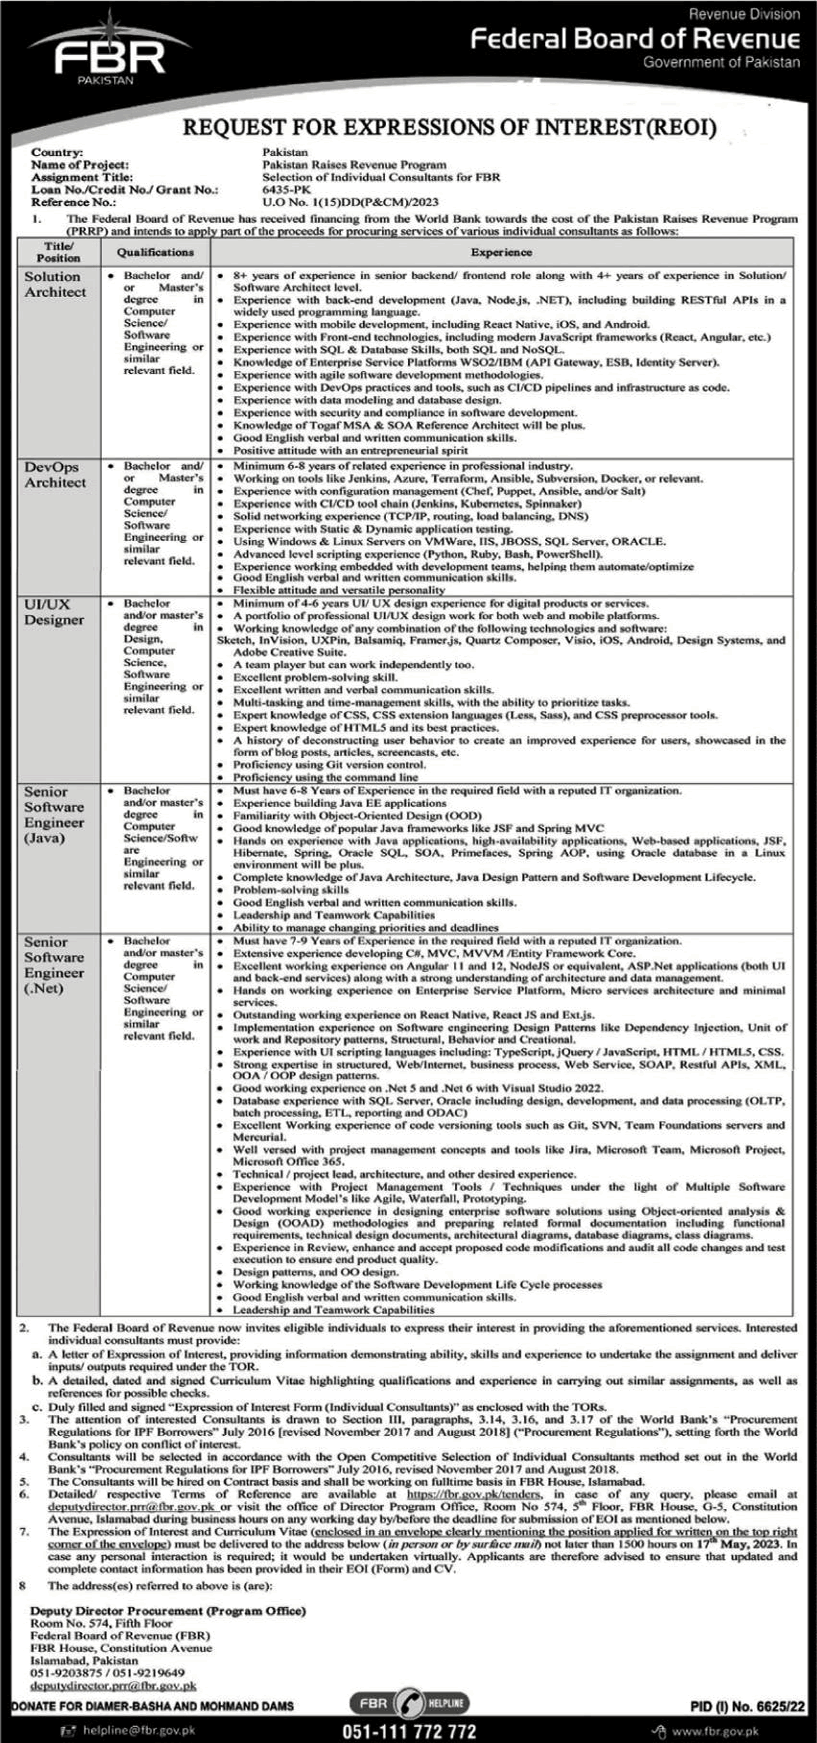 FBR Jobs April 2023 May Software Engineers & Others Federal Board of Revenue Latest